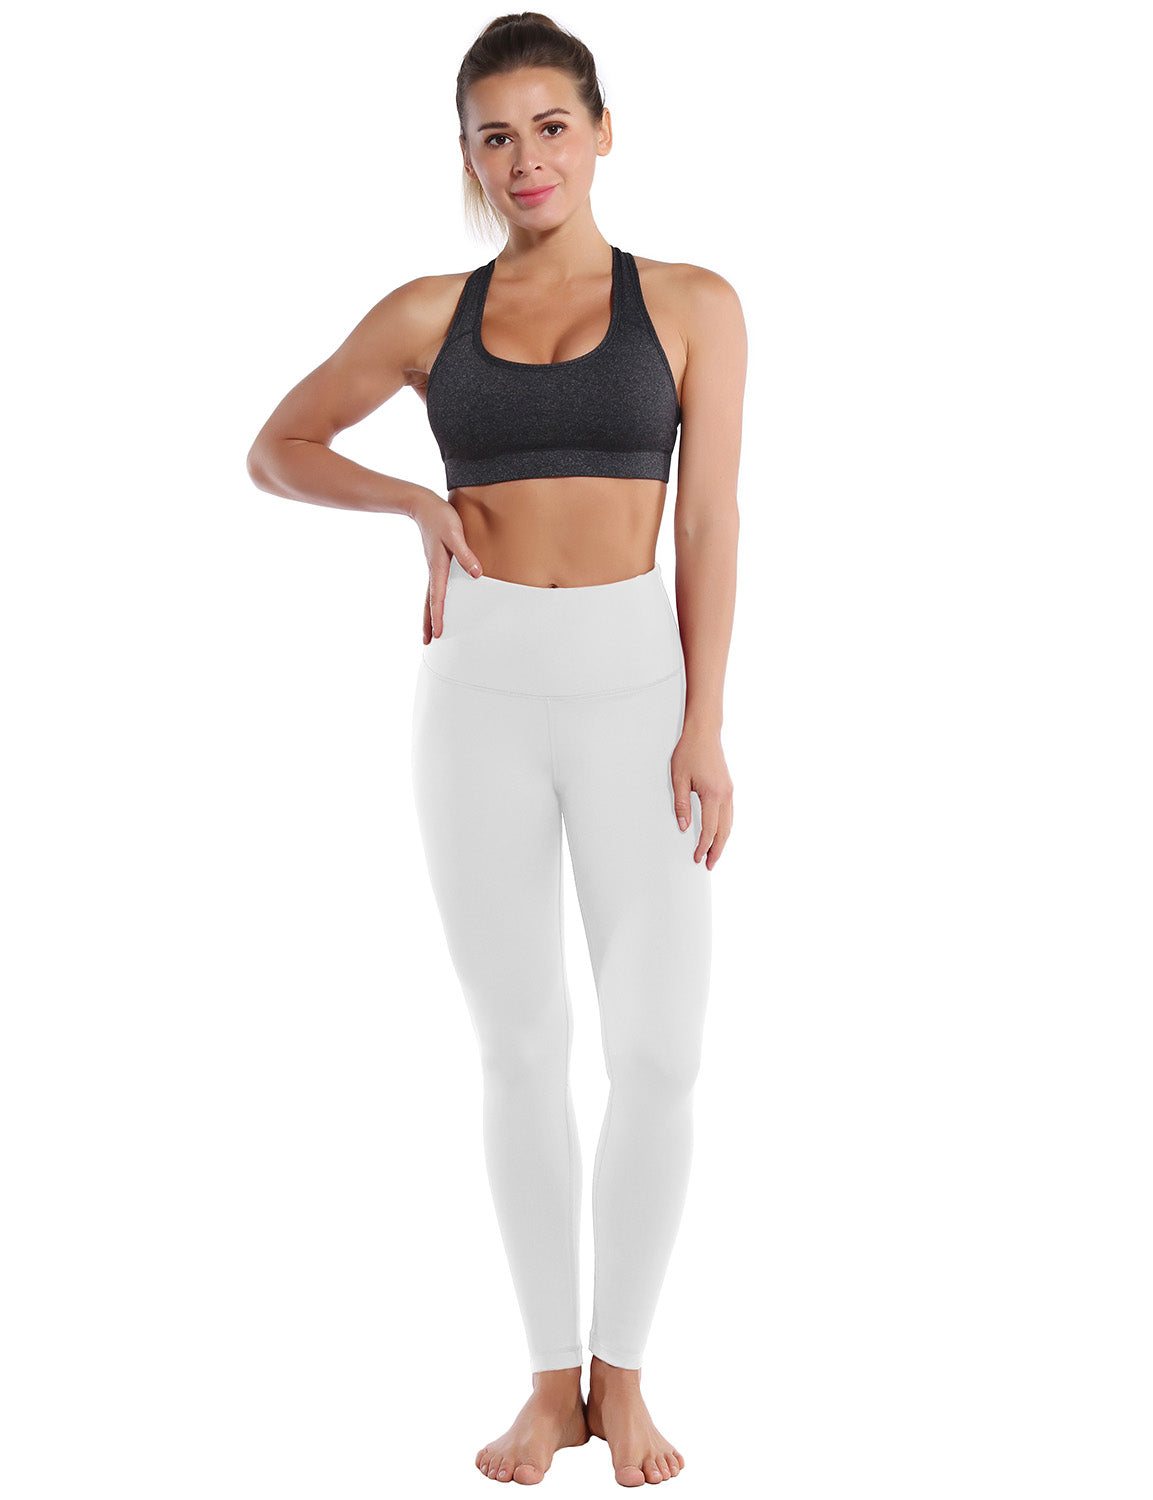 High Waist yogastudio Pants white 75%Nylon/25%Spandex Fabric doesn't attract lint easily 4-way stretch No see-through Moisture-wicking Tummy control Inner pocket Four lengths